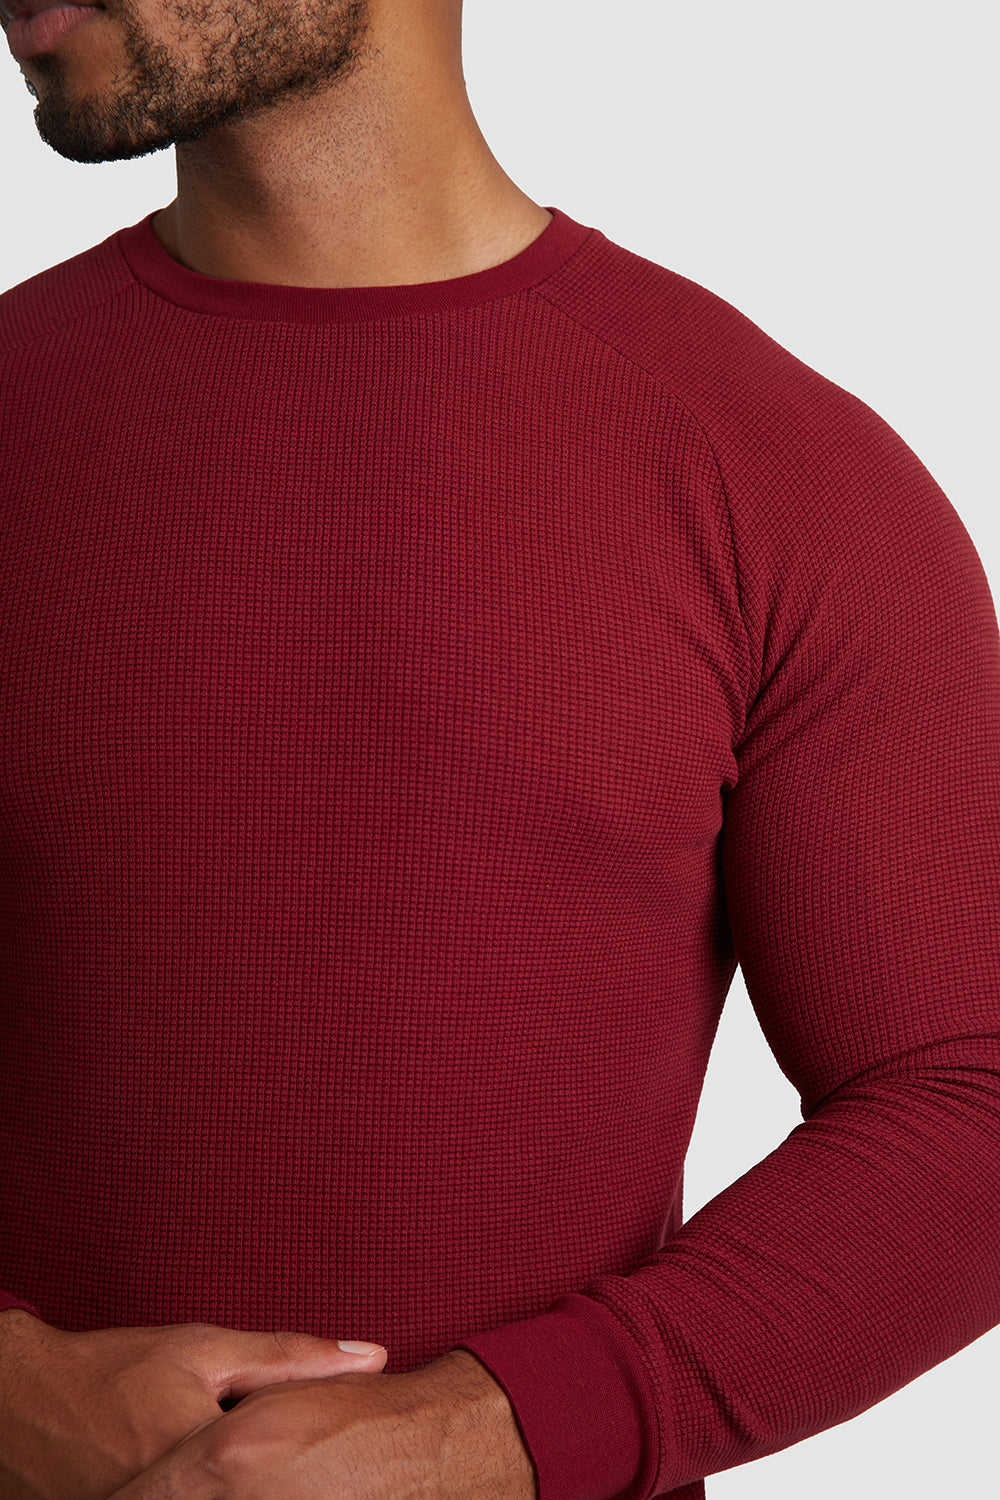 Waffle Long Sleeve T-Shirt in Claret - TAILORED ATHLETE - USA